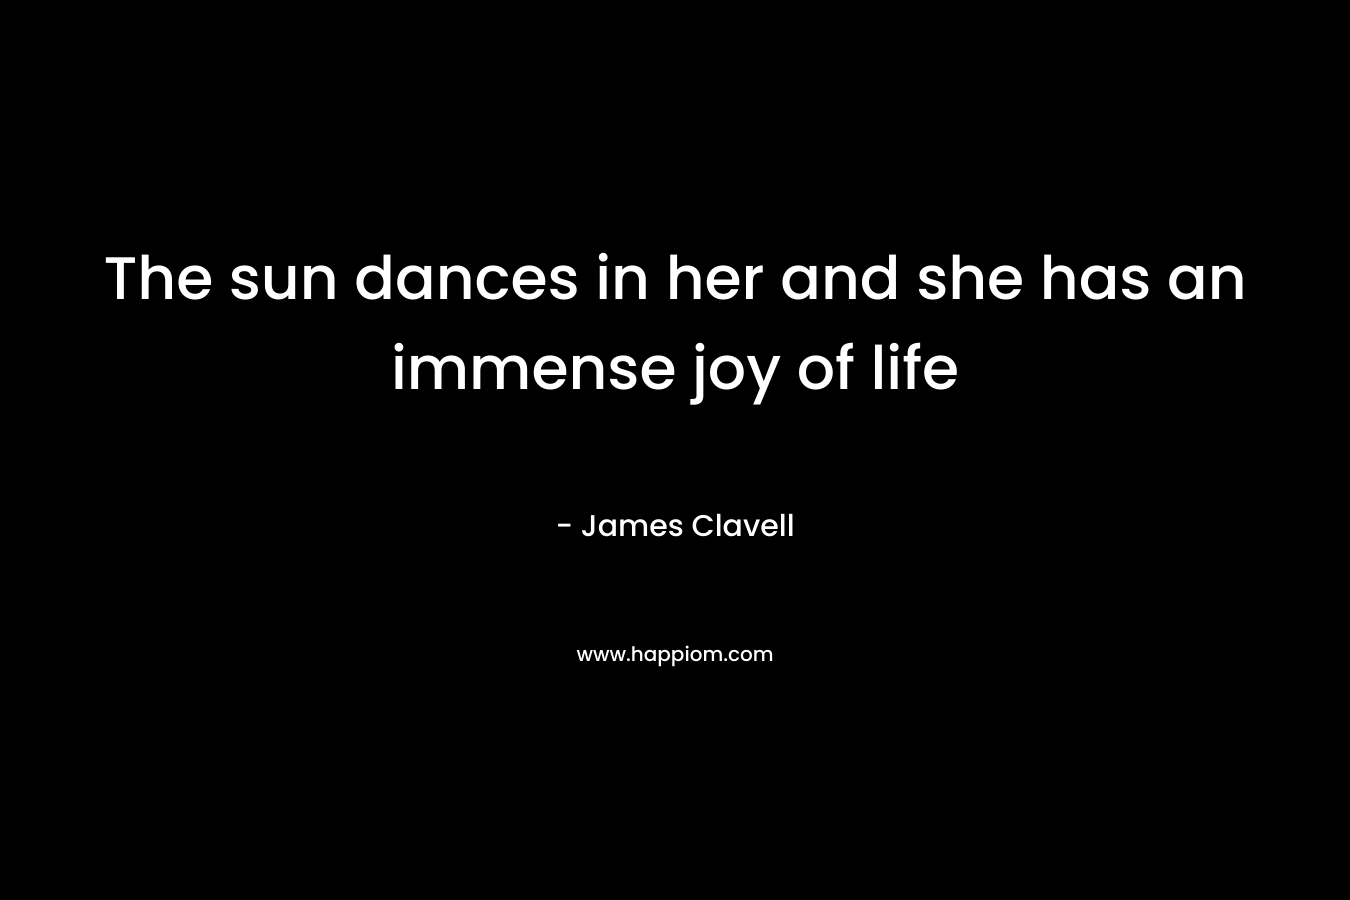 The sun dances in her and she has an immense joy of life